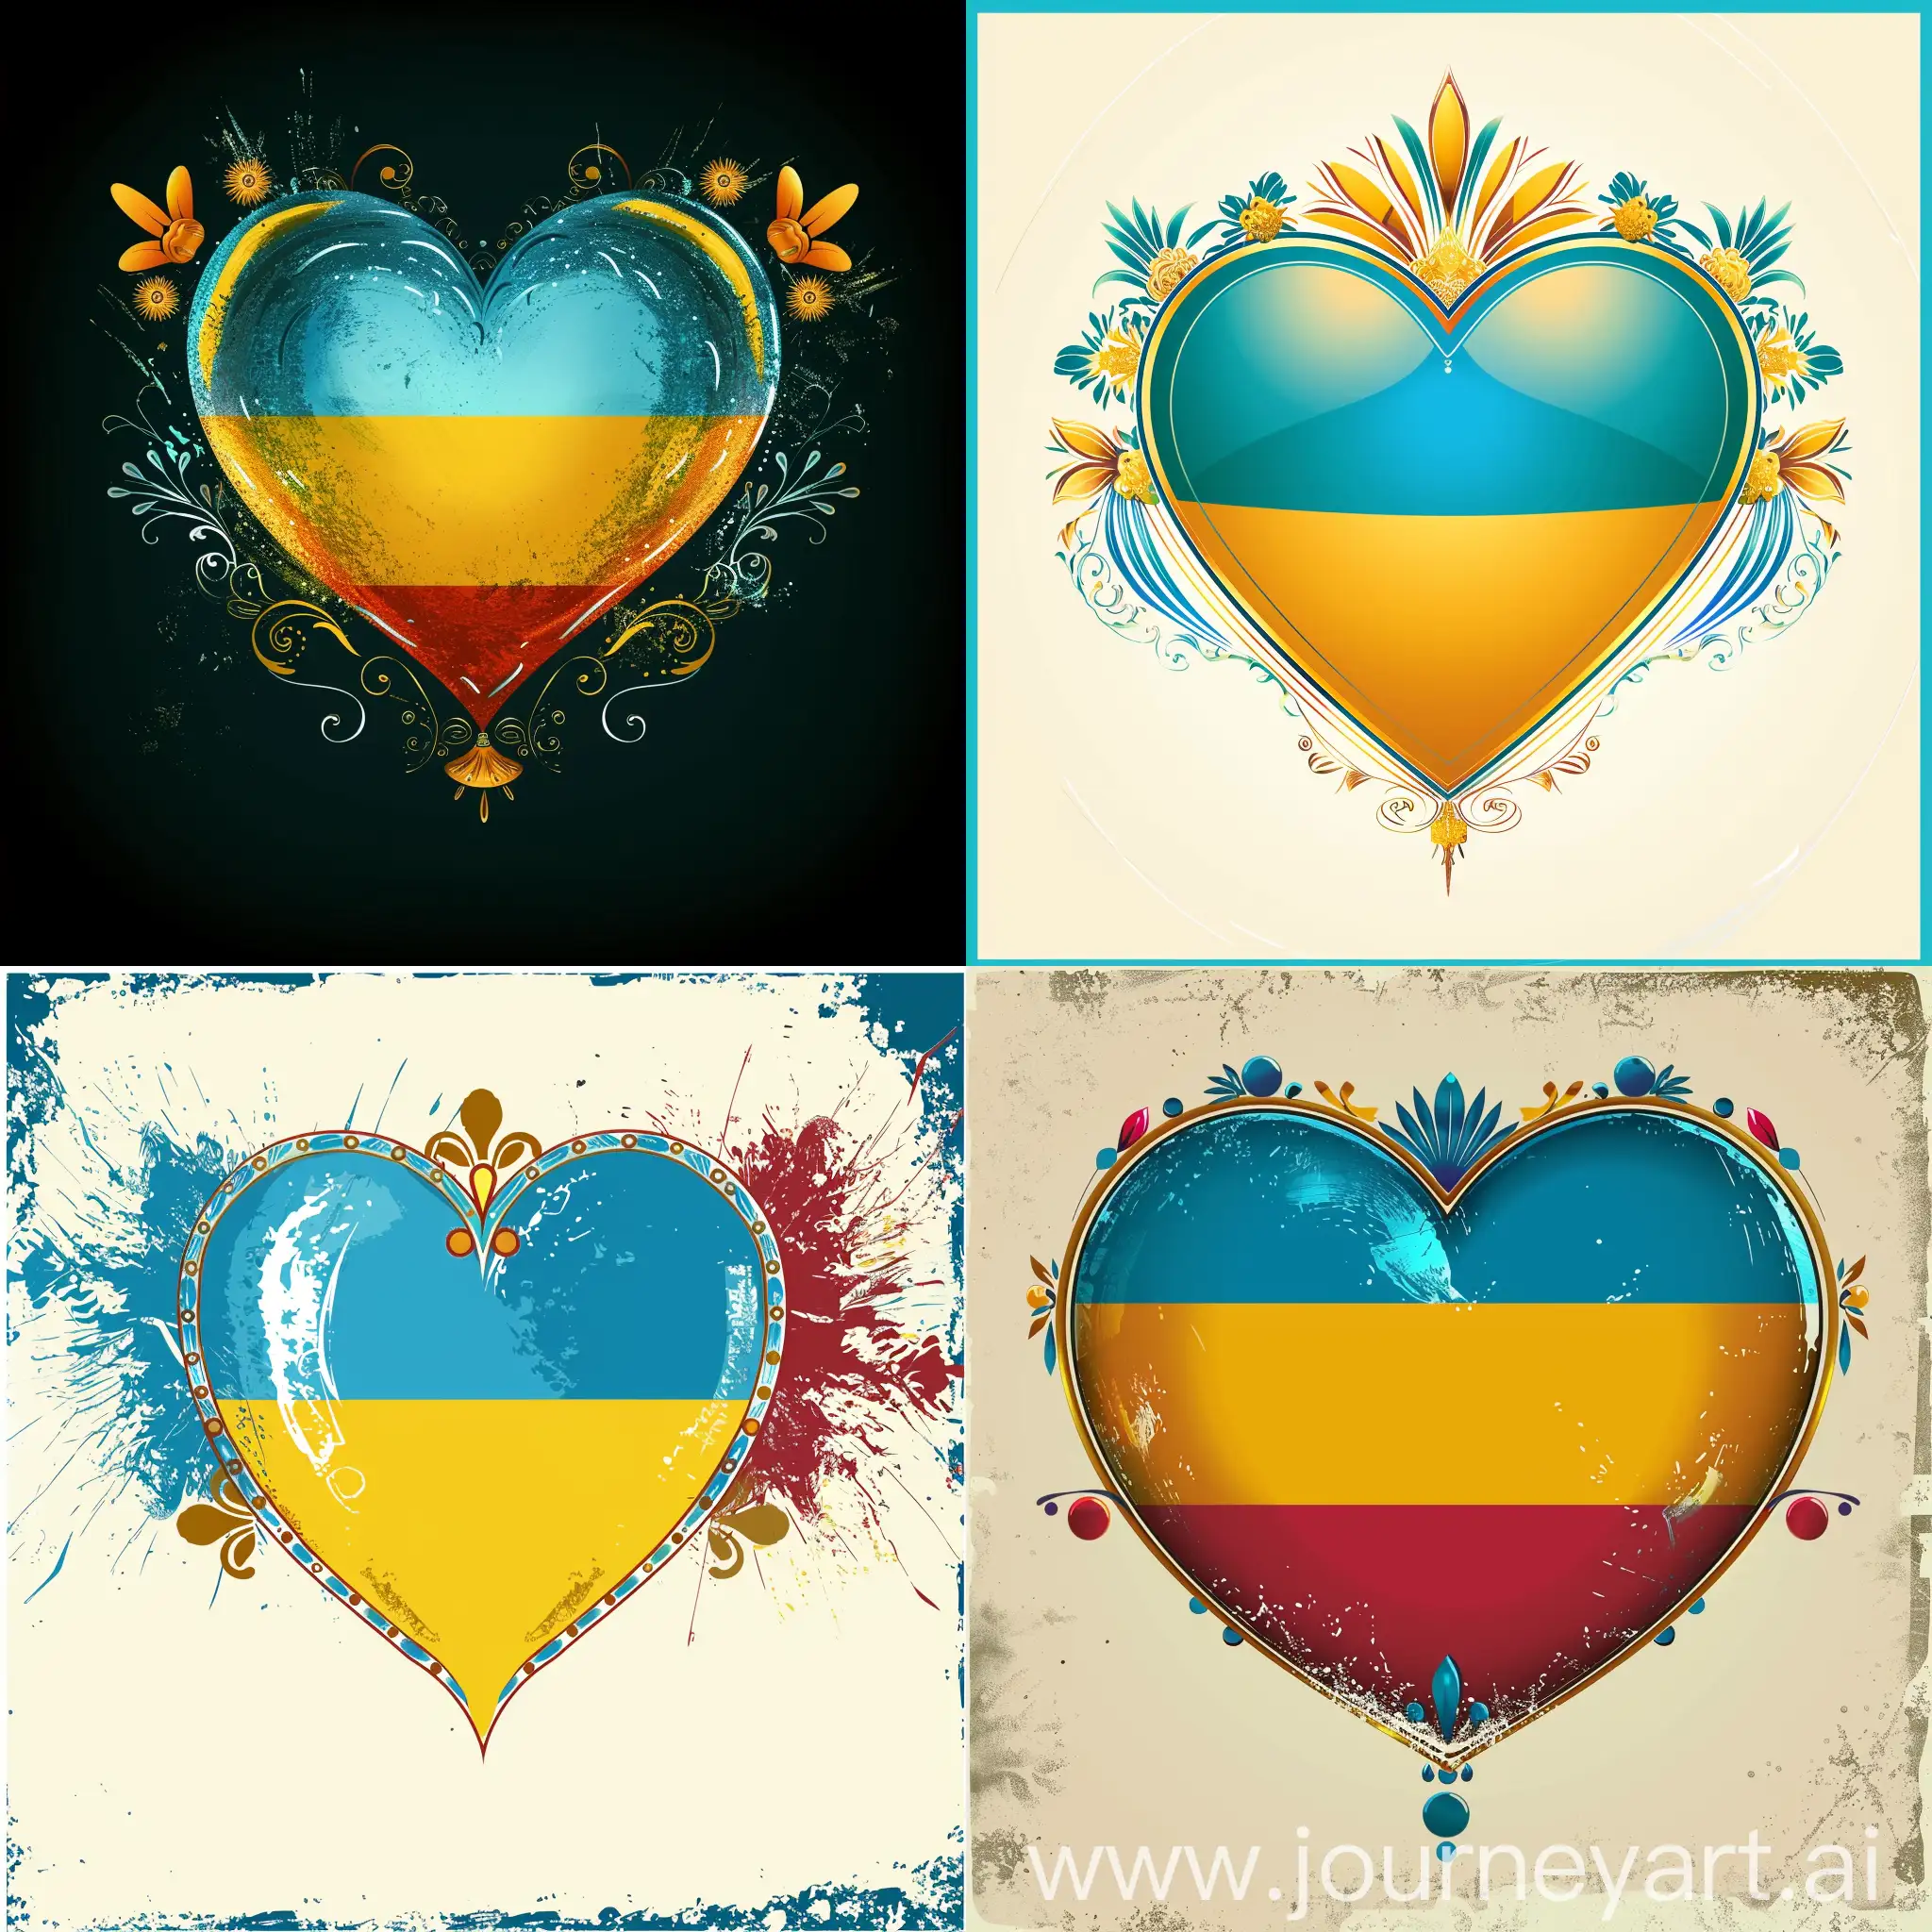 Kazakhstan-Flag-Heart-with-Ornamental-Accents